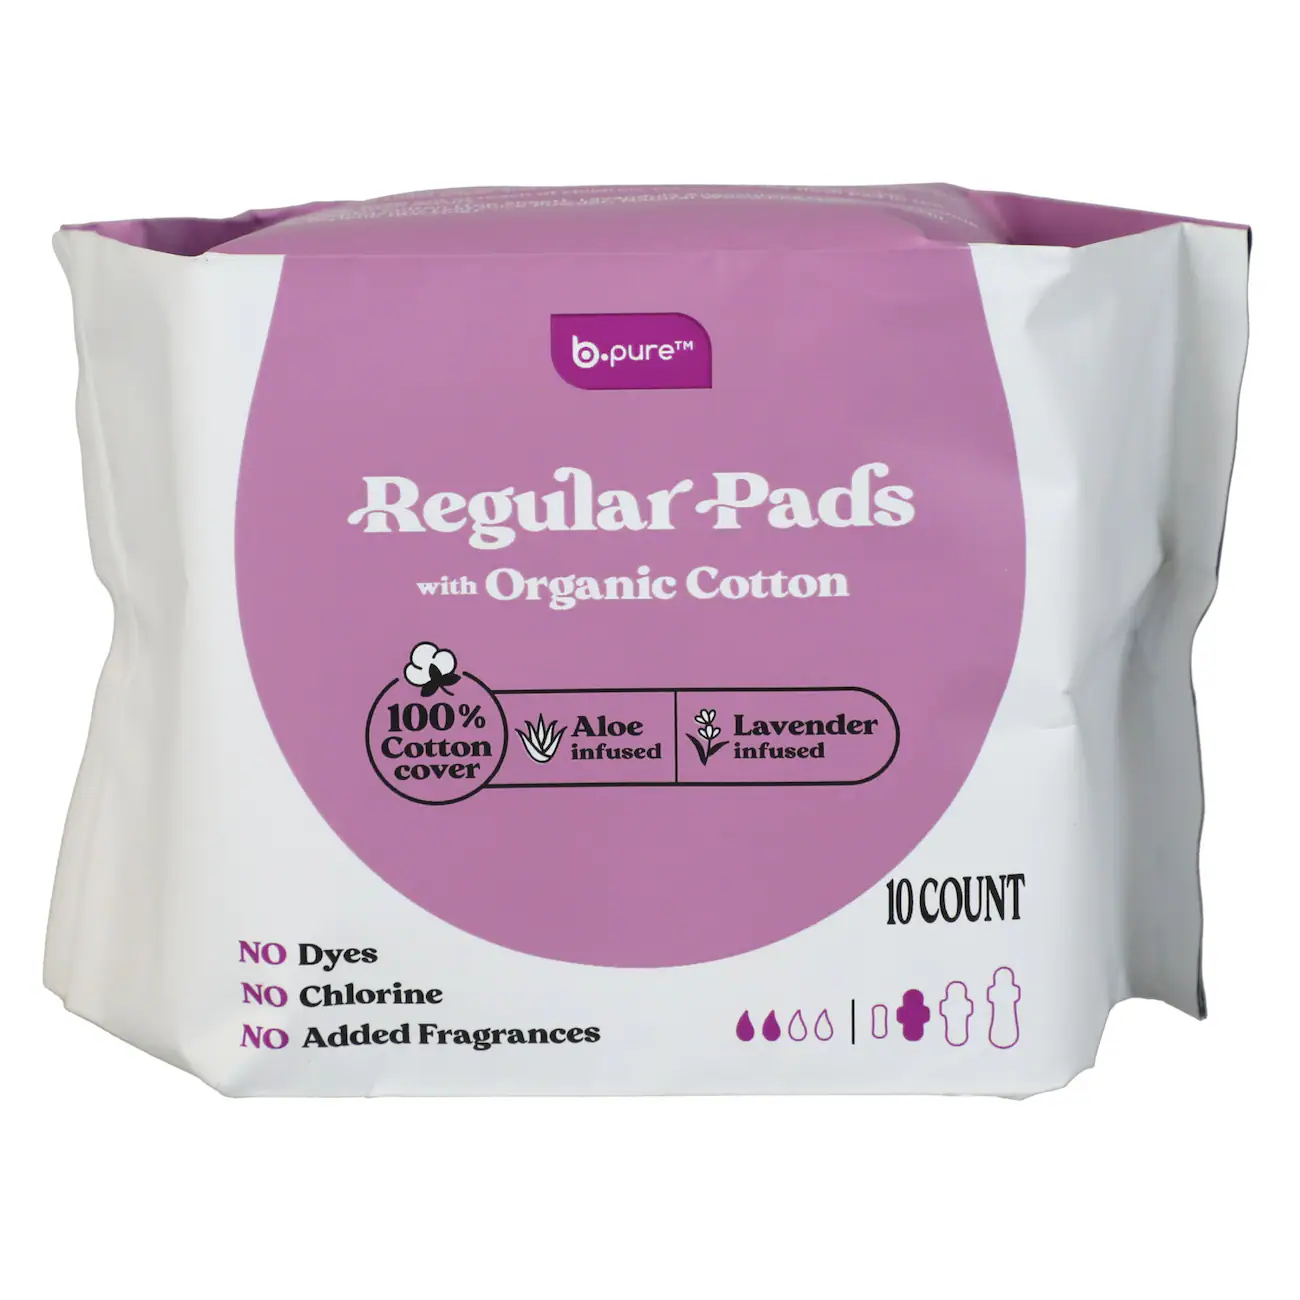 b.pure - Lavender and Aloe Infused Regular Pads, 10 ct.